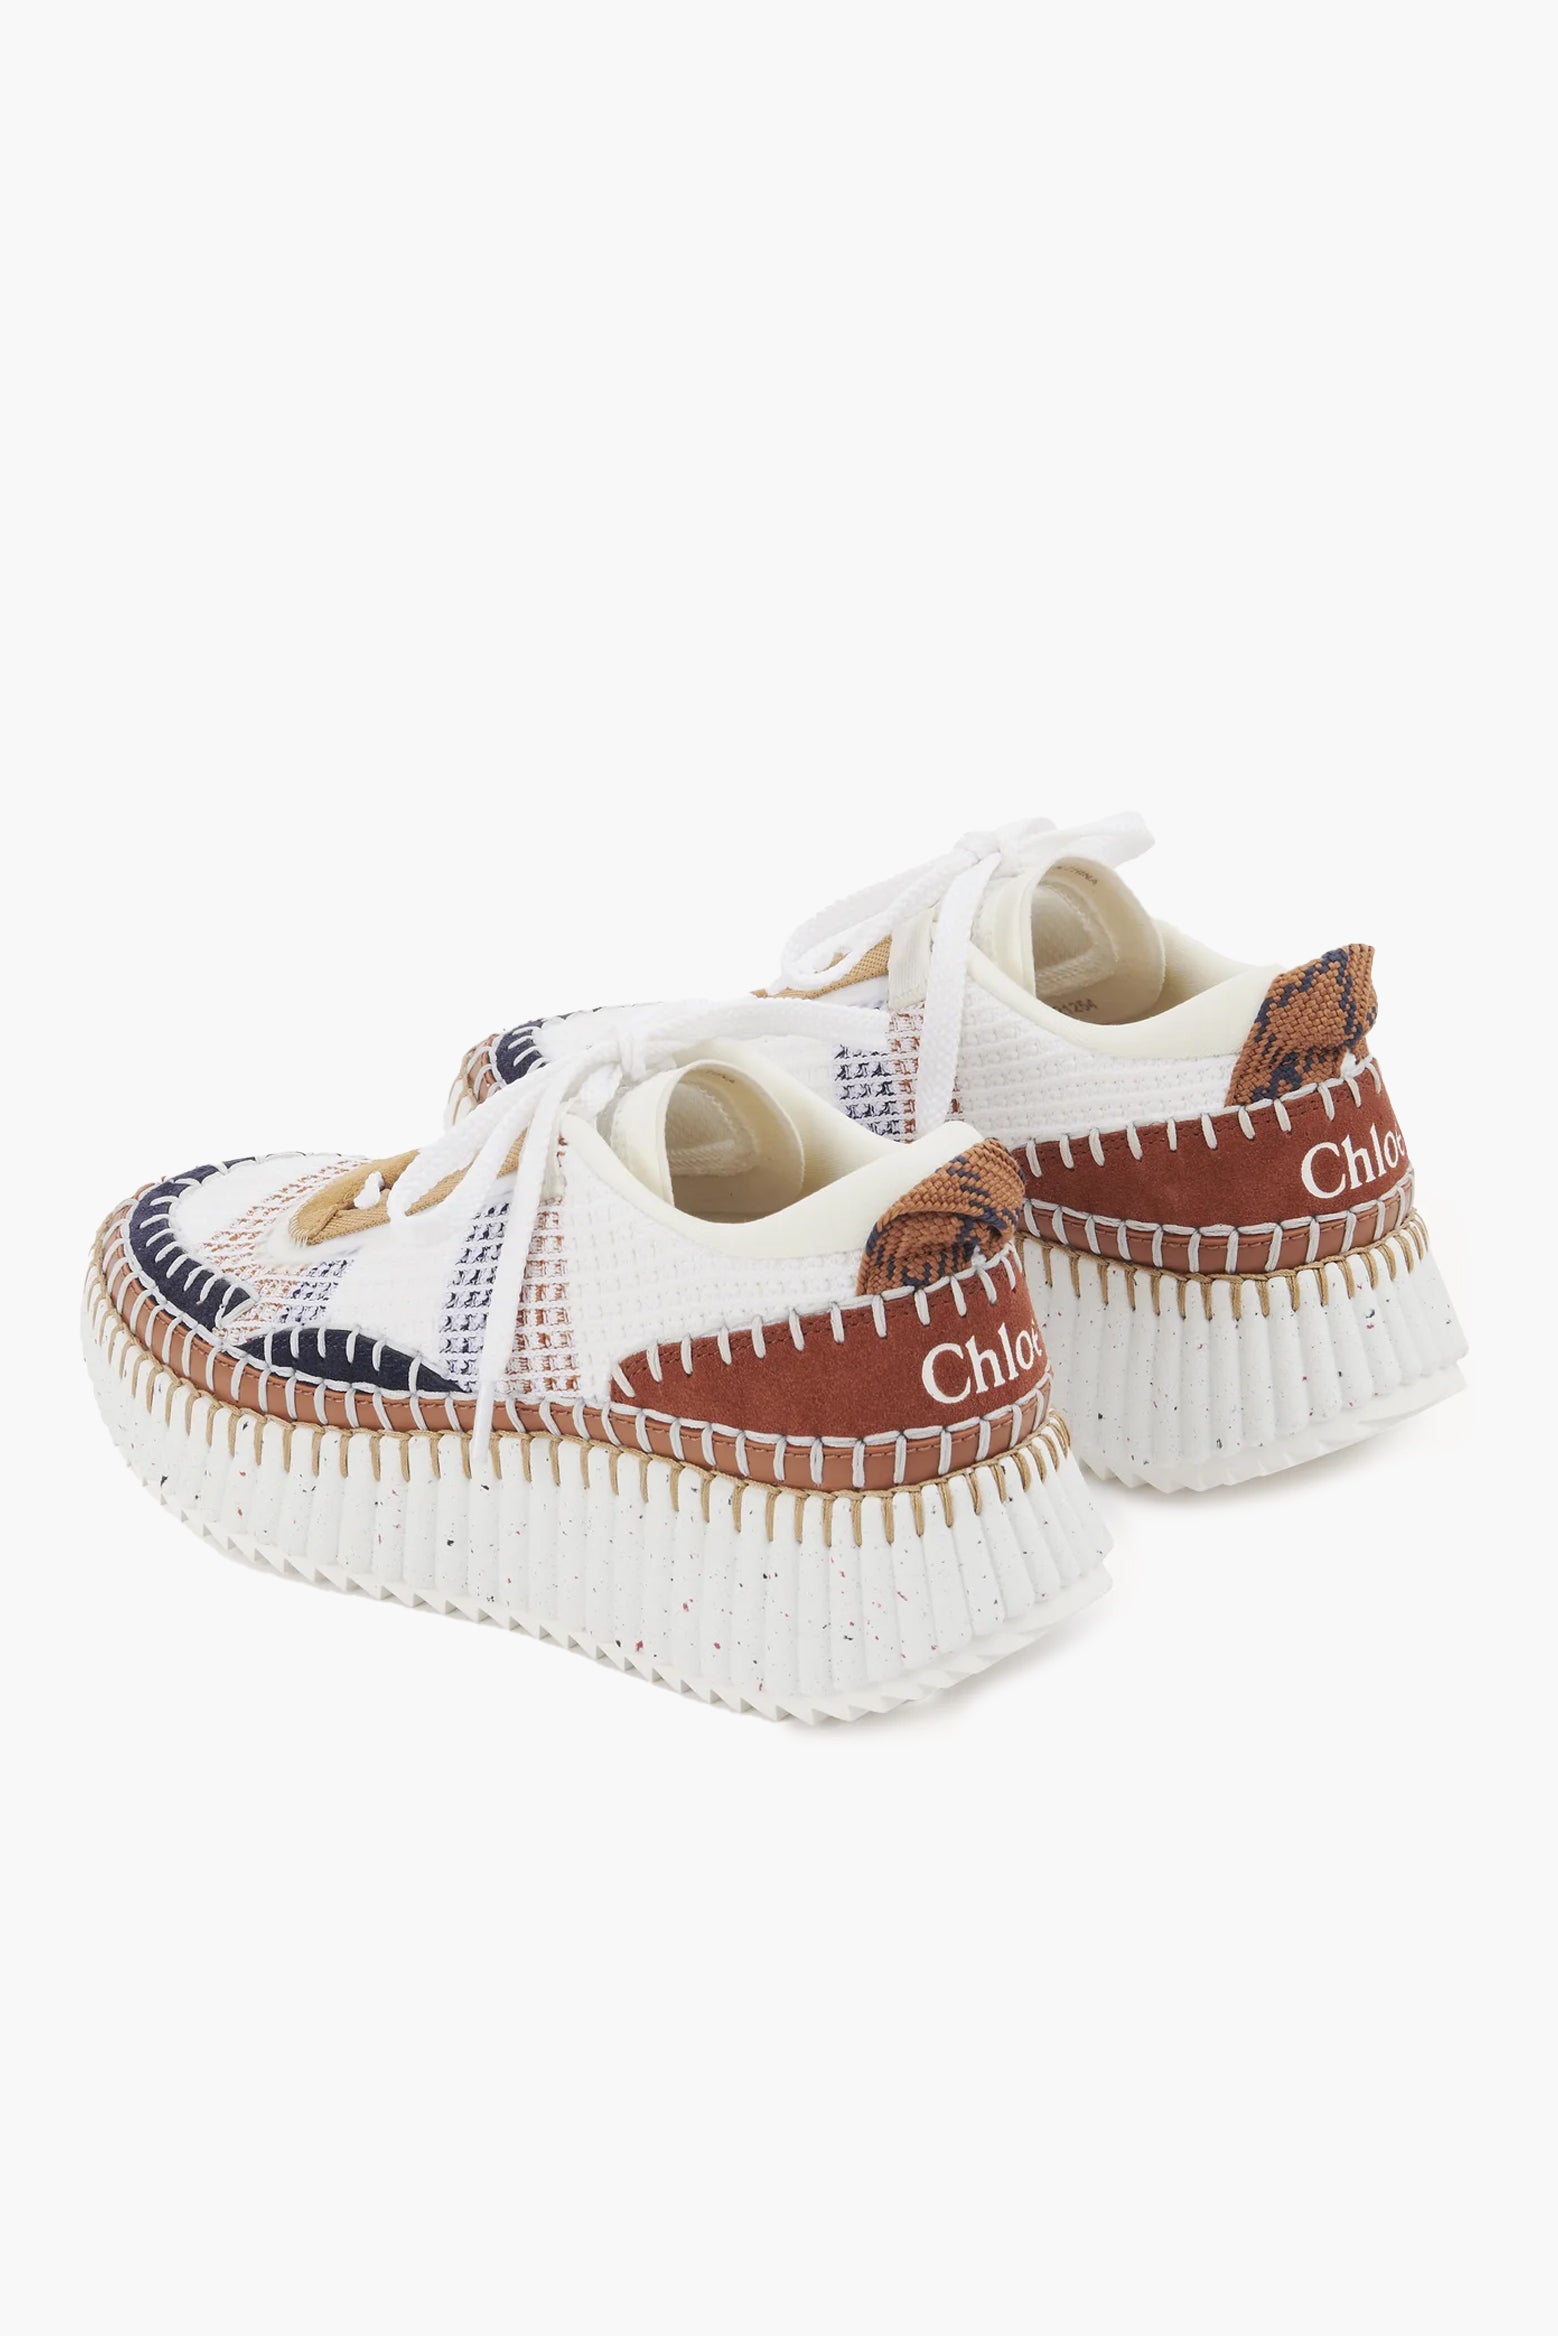 Chloé Nama Sneaker in Ginger Red available at The New Trend Australia.